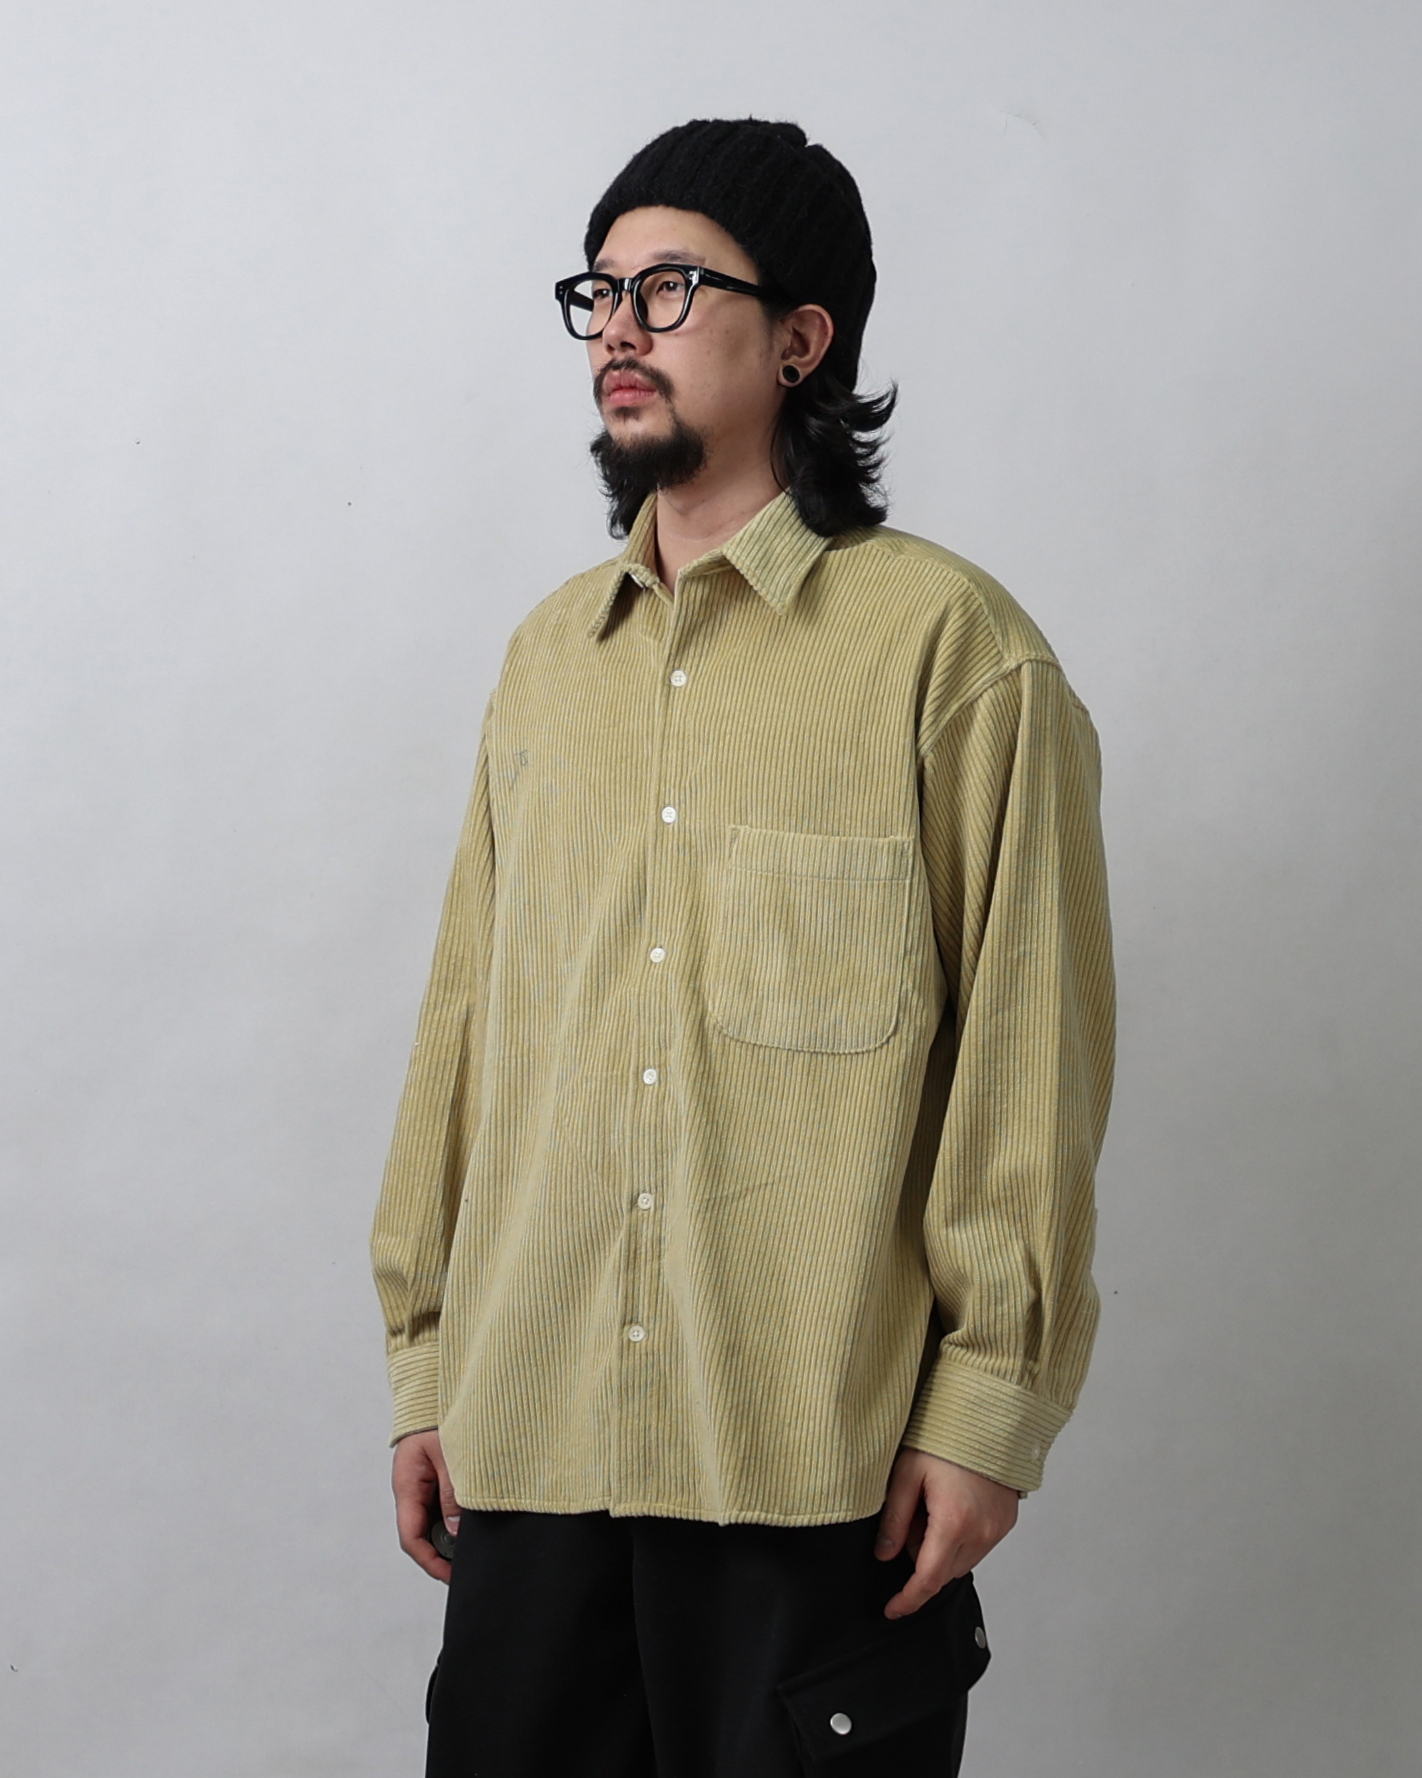 HESTRY Corduroy Loose Daily Shirts (Brown/Blue Green/Mustard/Ivory)